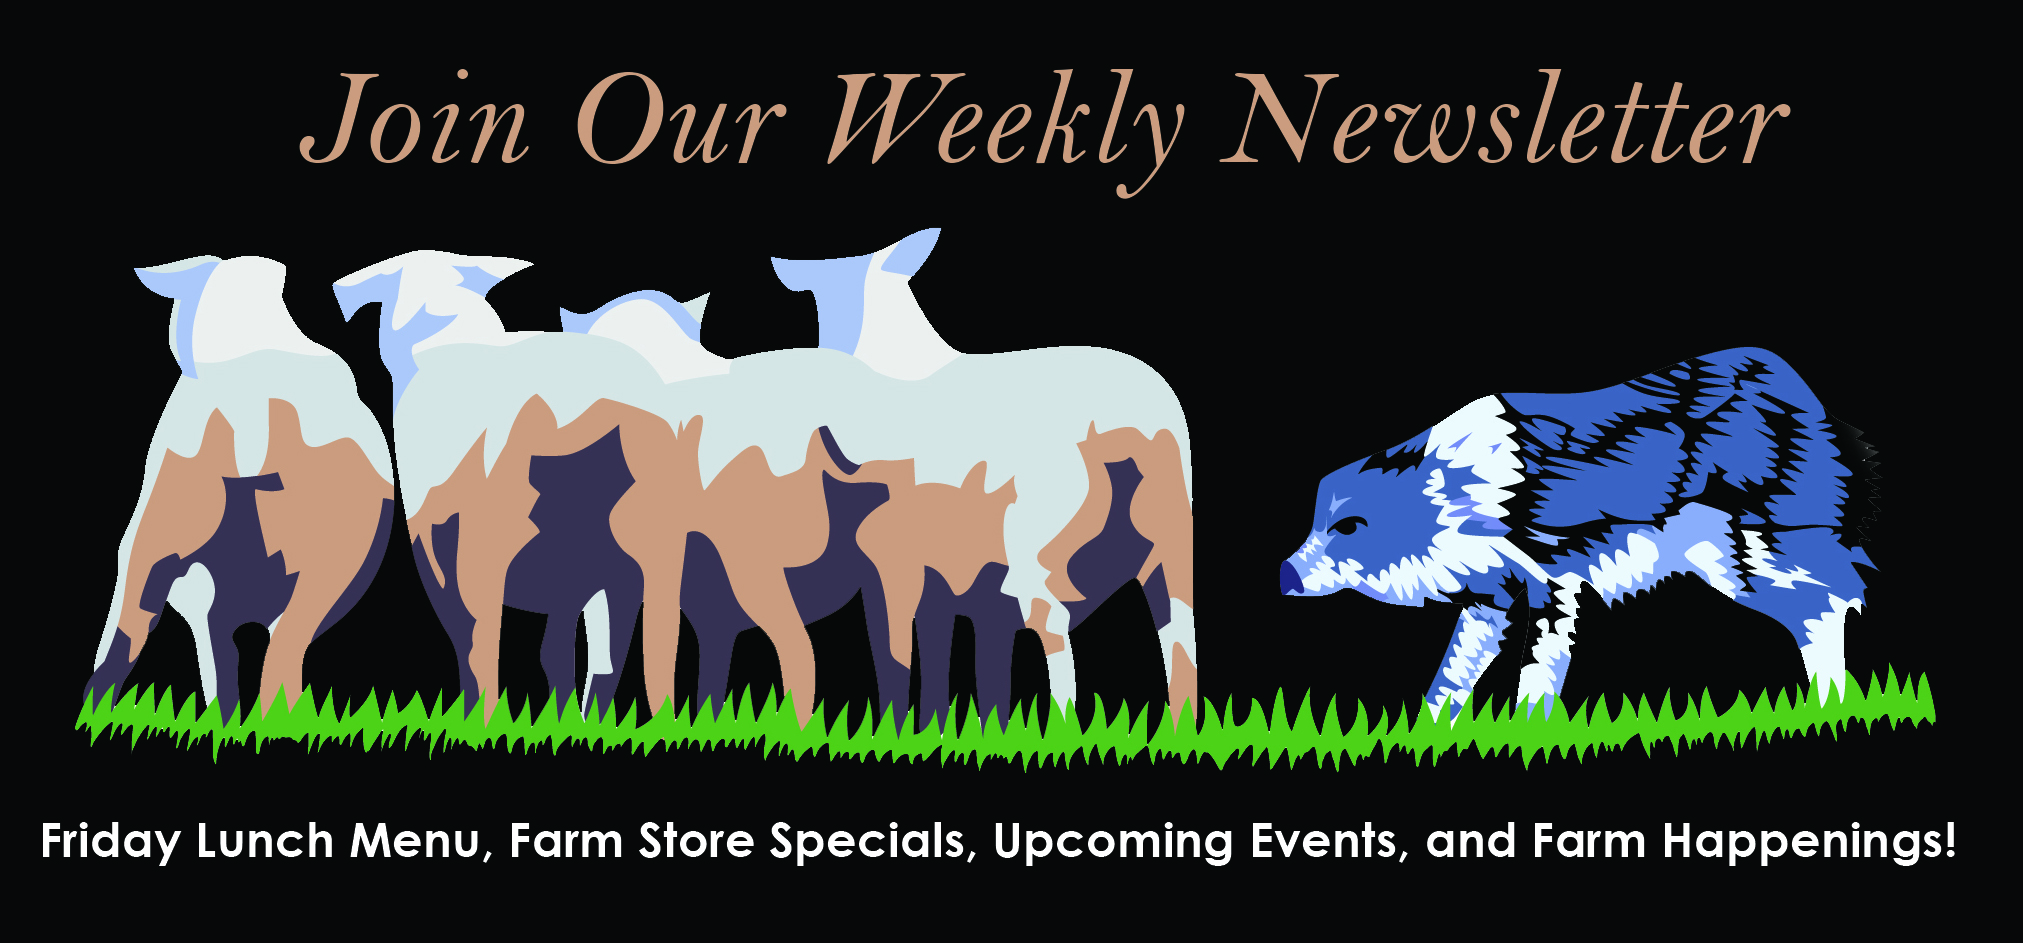 Join our Weekly Newsletter!